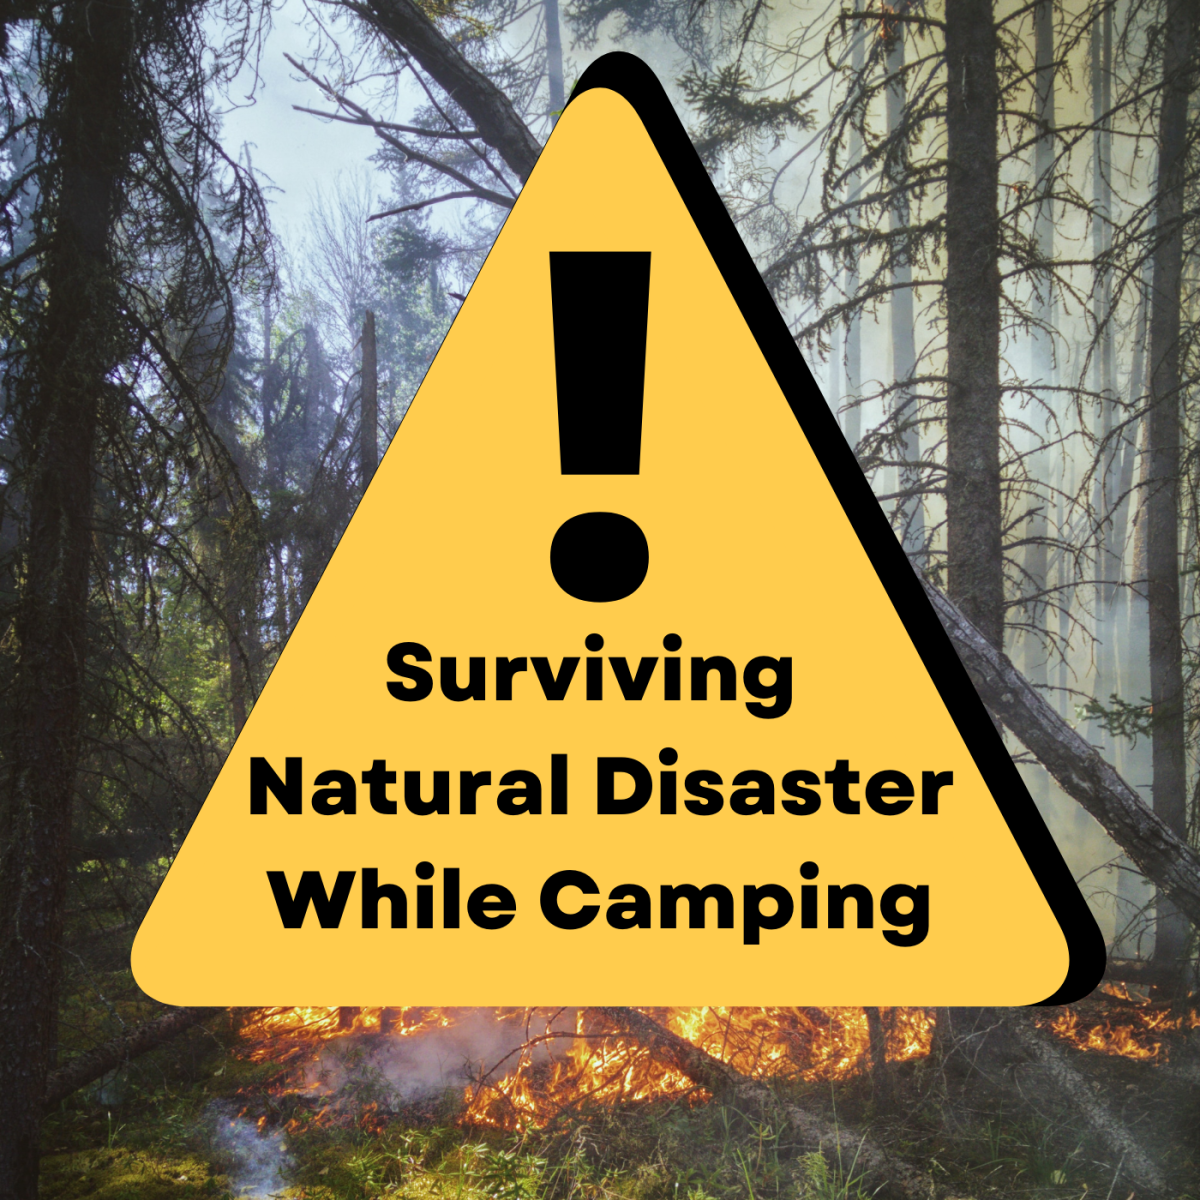 How to Survive Natural Disasters When Camping